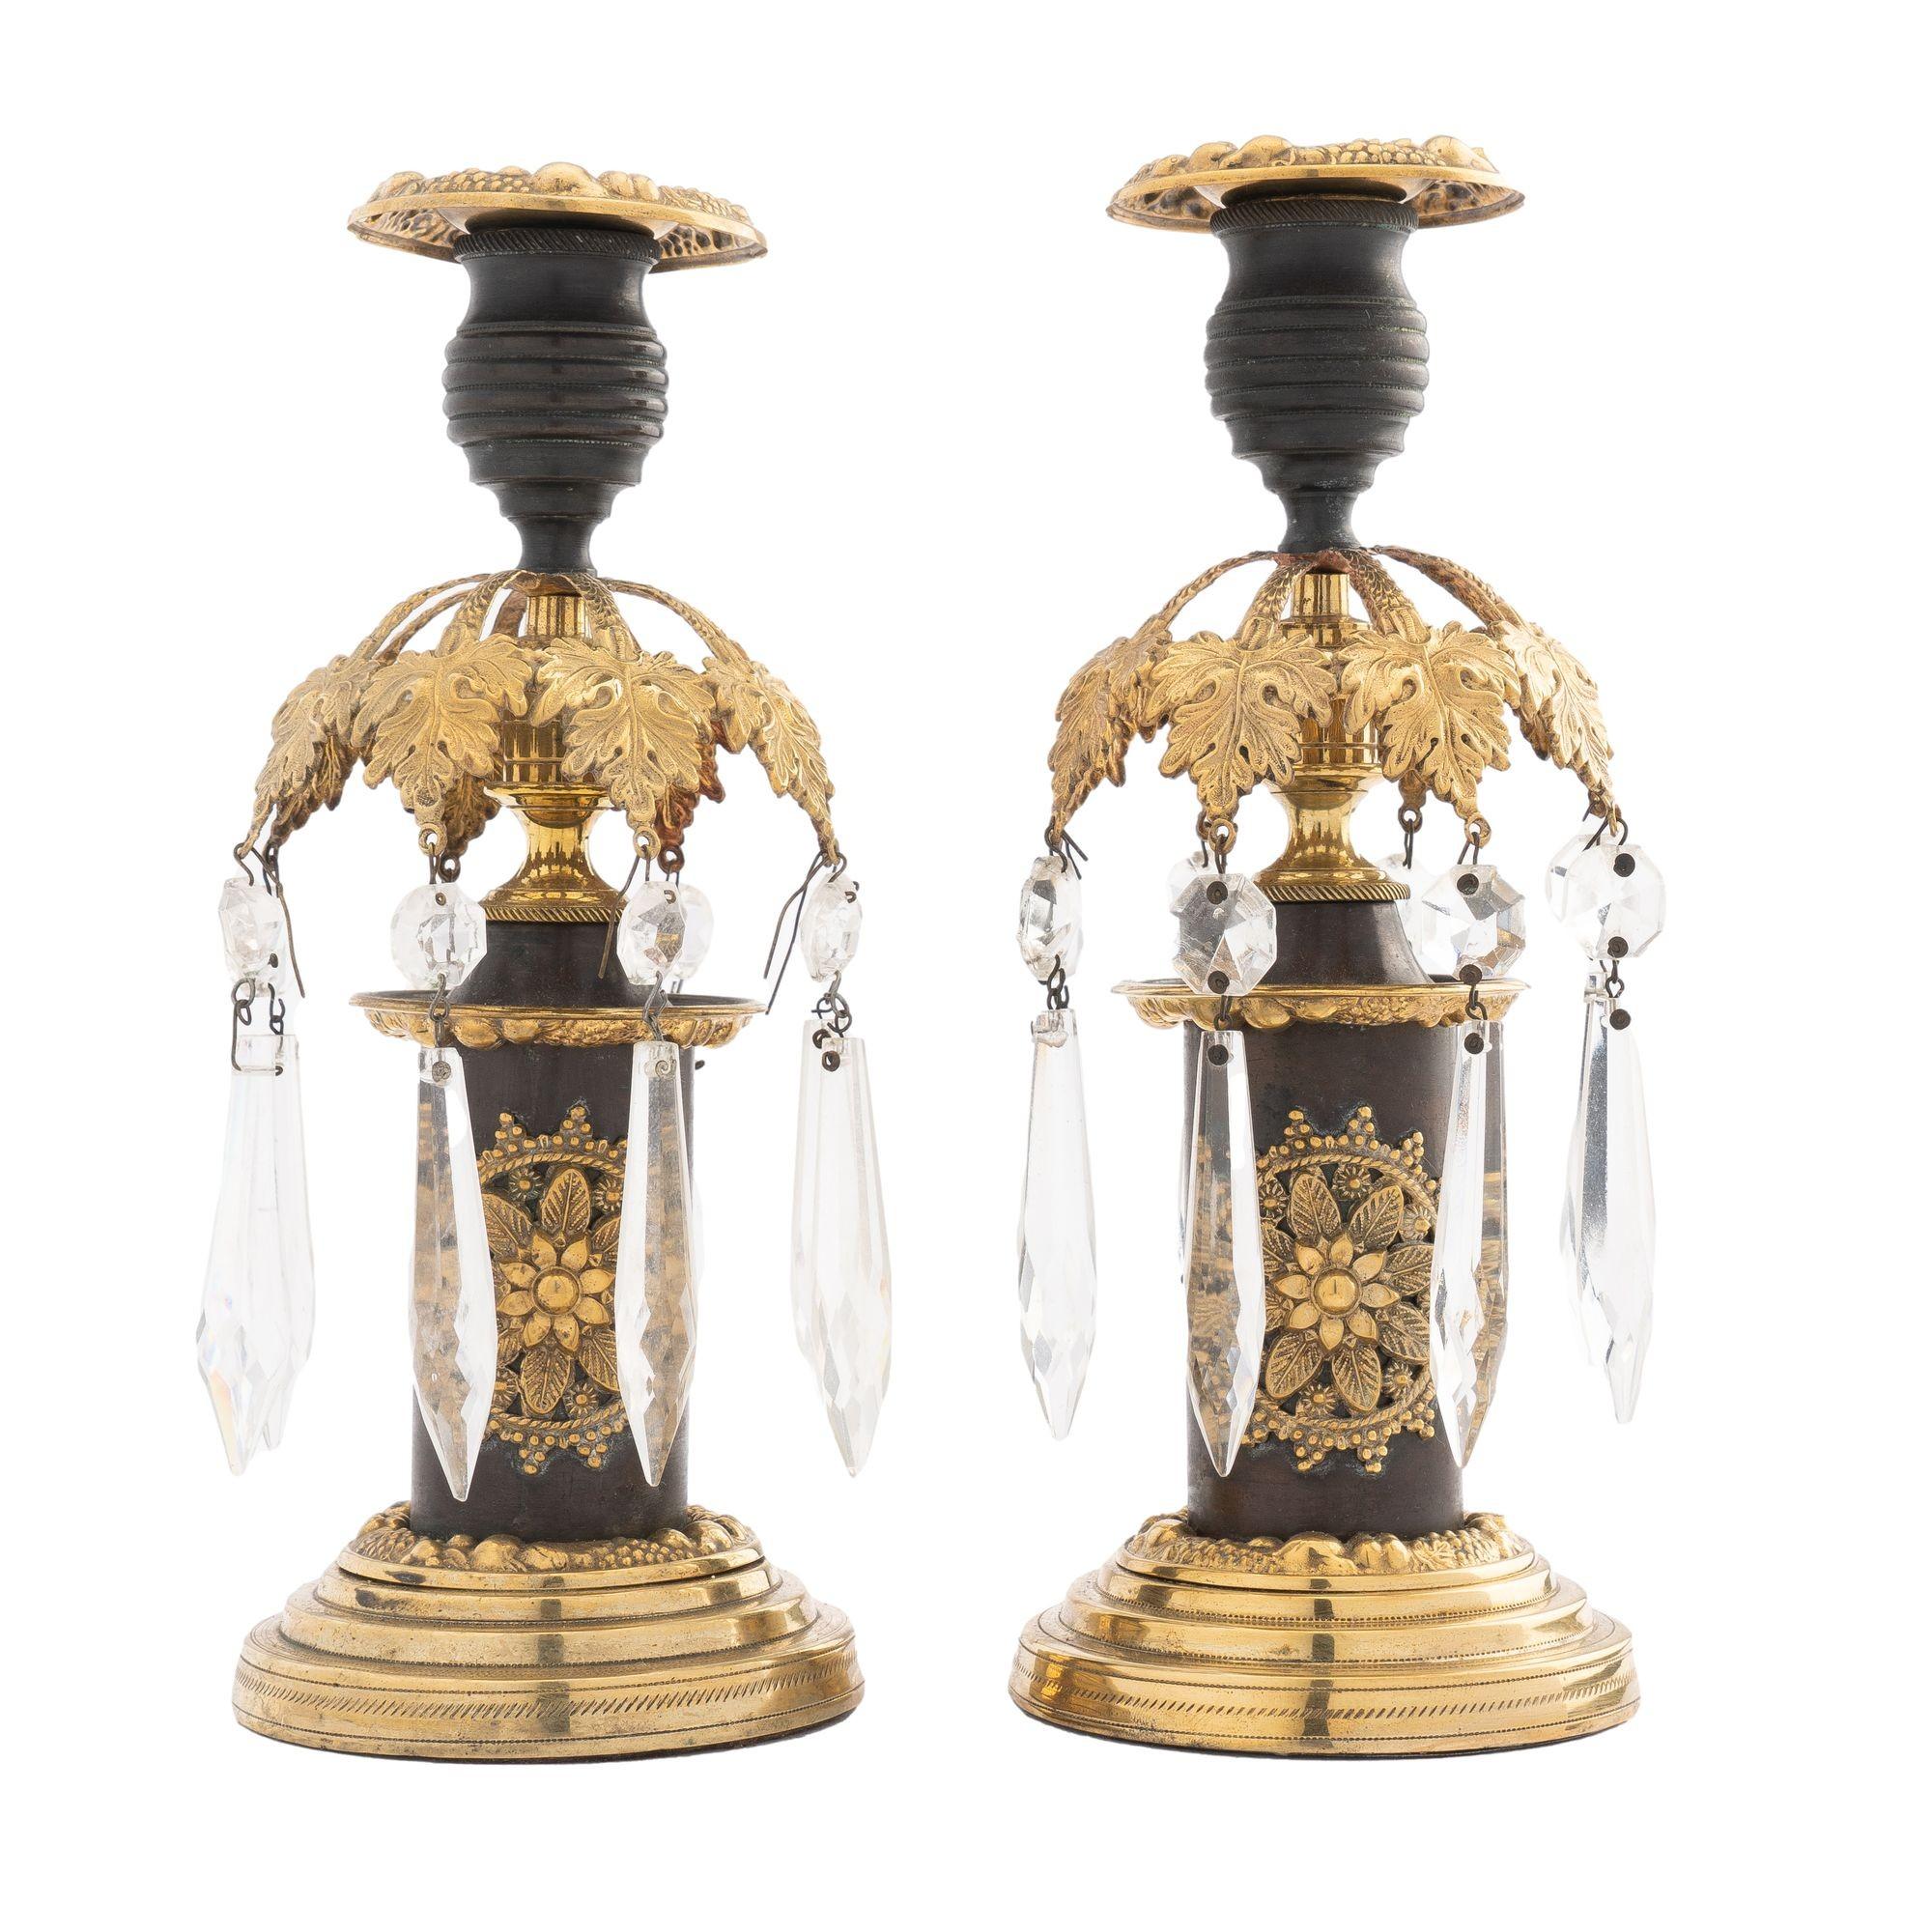 Pair of cast & patinated bronze candlesticks with applied stamped & polished brass embellishments and foliate luster ring. Hung with tear drop cut crystal lusters.

England, Regency Period, circa 1800.